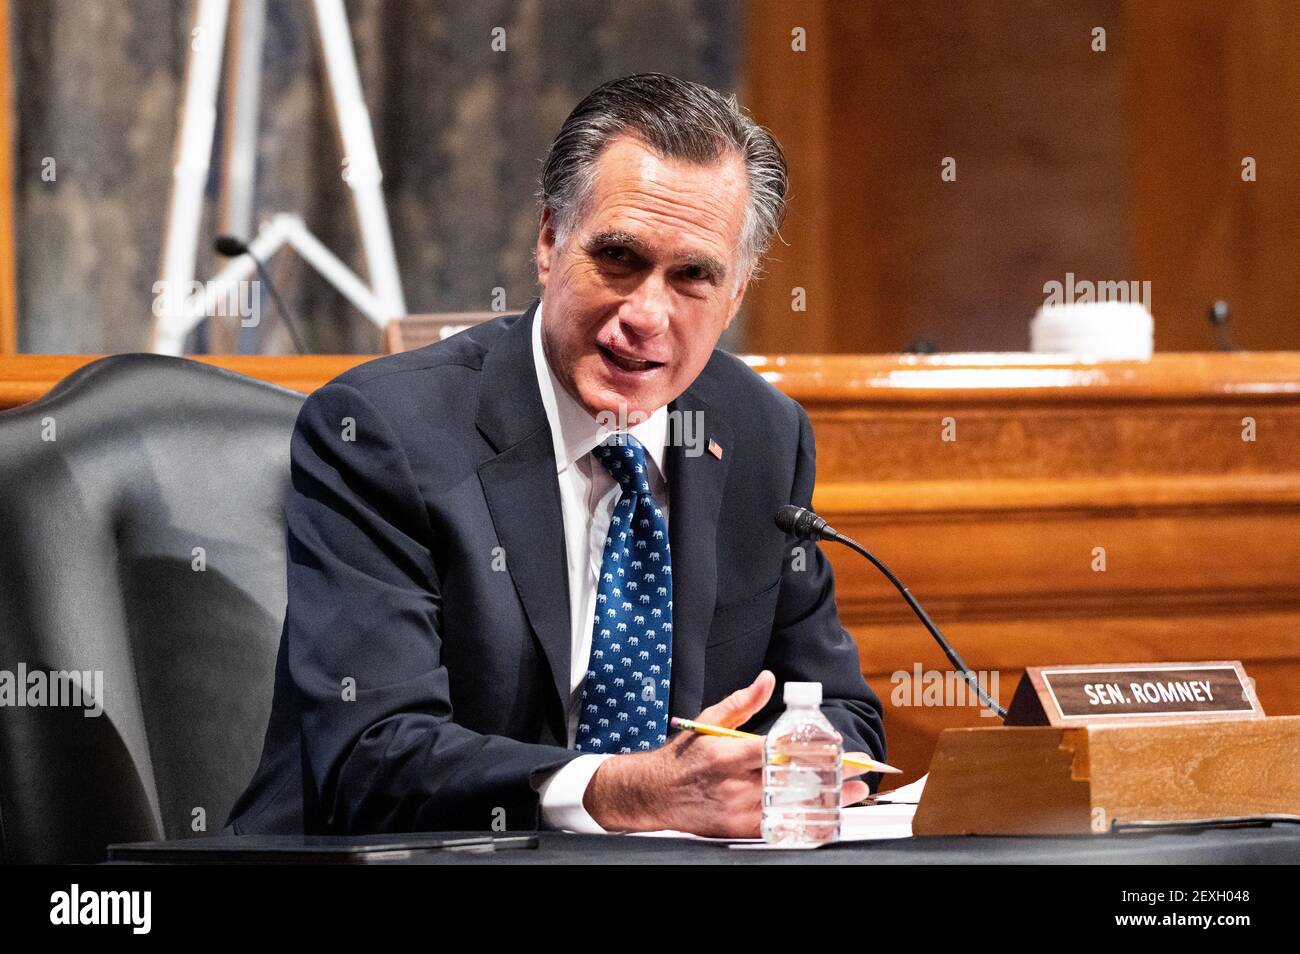 U.S. Senator Mitt Romney (R-UT) speaks at a hearing of the Senate Homeland Security and Governmental Affairs committee. Stock Photo